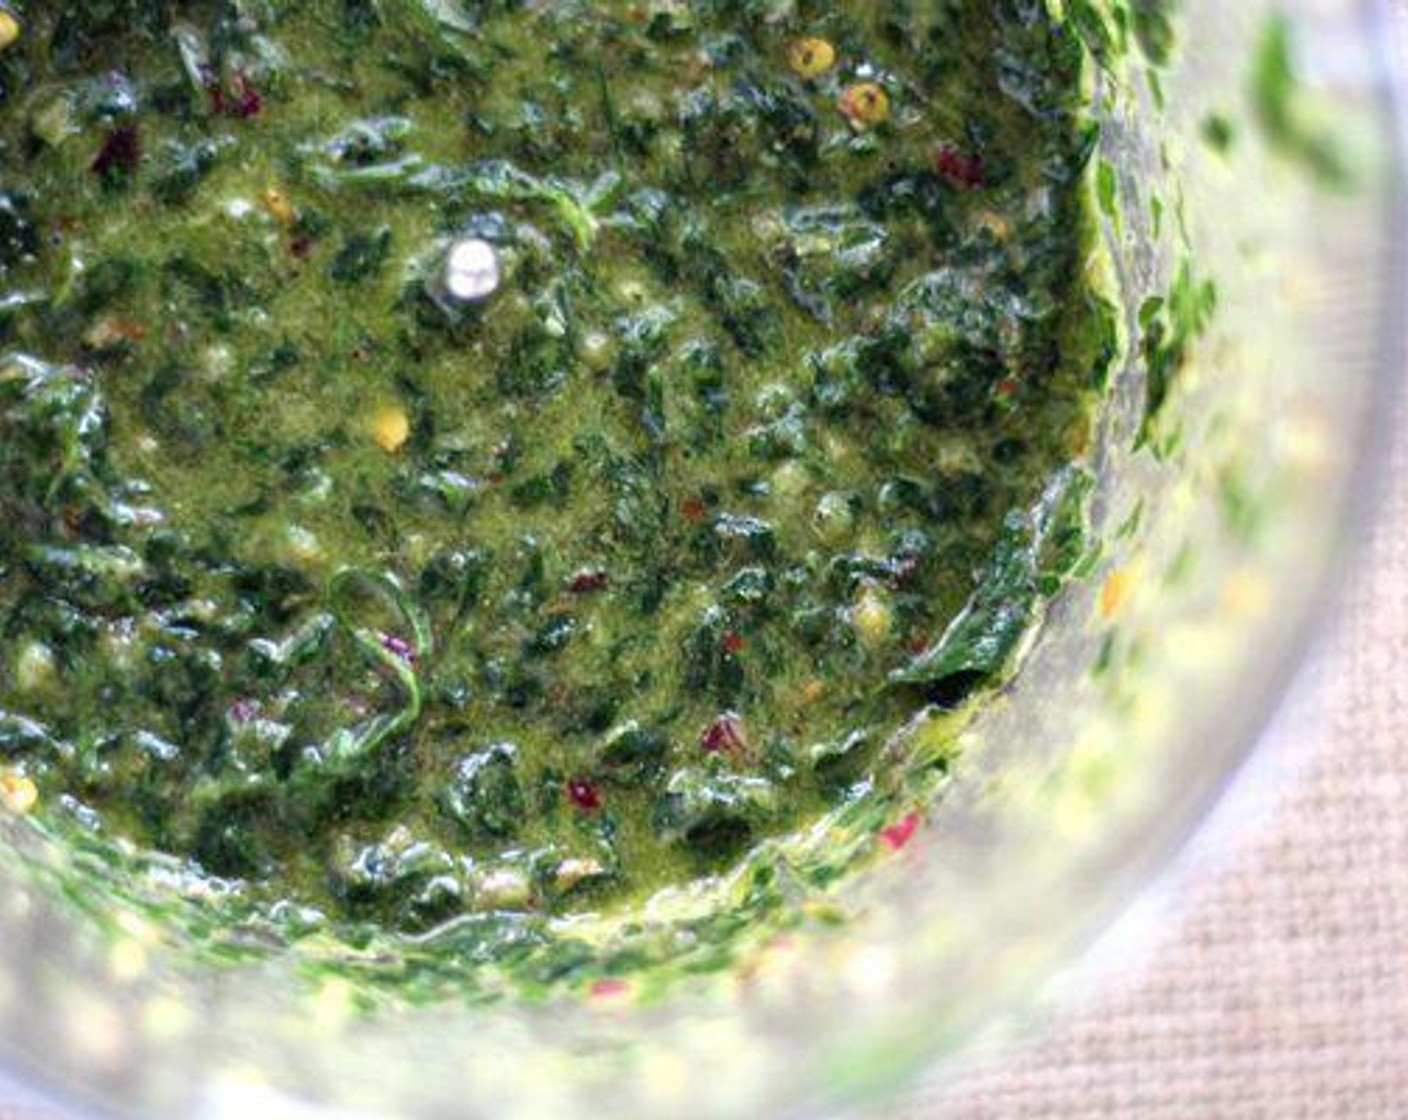 step 3 In a food processor, combine the Chimichurri (1 Tbsp), Italian Flat-Leaf Parsley (2 cups), Lime (1), Red Onions (2 Tbsp), Crushed Red Pepper Flakes (1/2 tsp), Garlic (1 Tbsp), Salt (1/2 tsp), and Ground Black Pepper (1/2 tsp). Pulse until well combined. Gradually add Olive Oil (1/2 cup), blending and processing until well blended. Set aside.